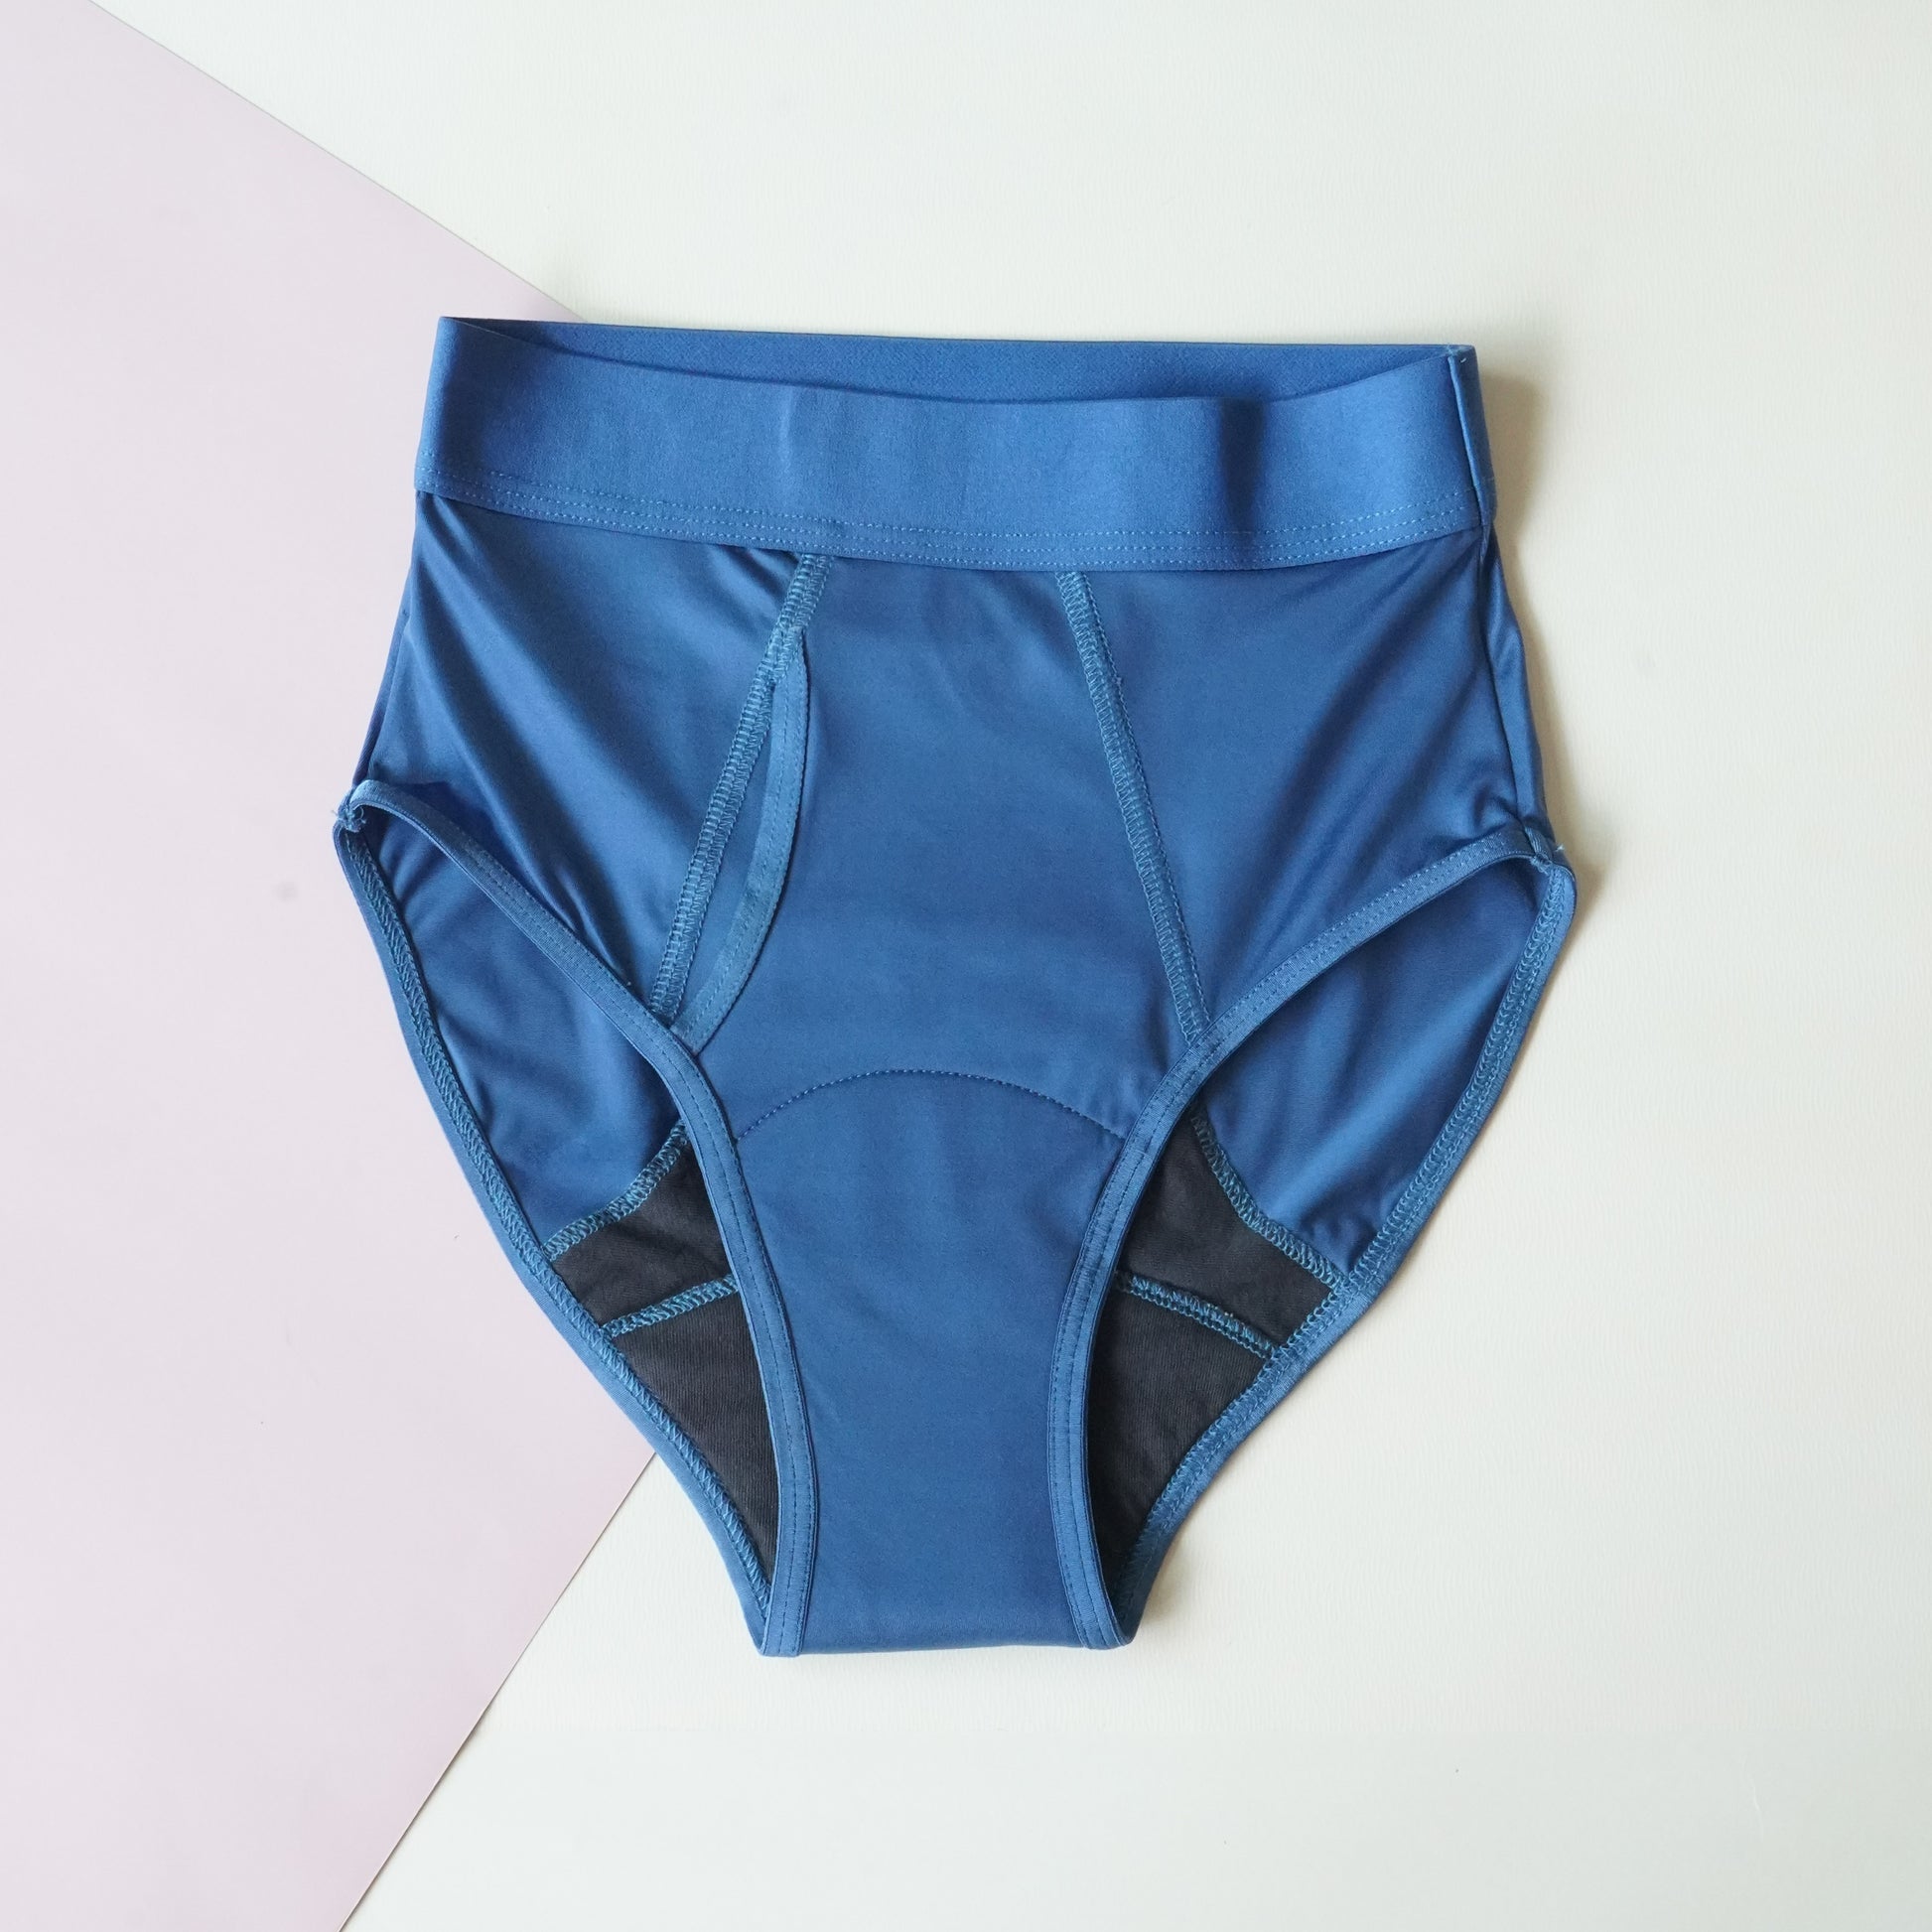 Lily period-proof panty